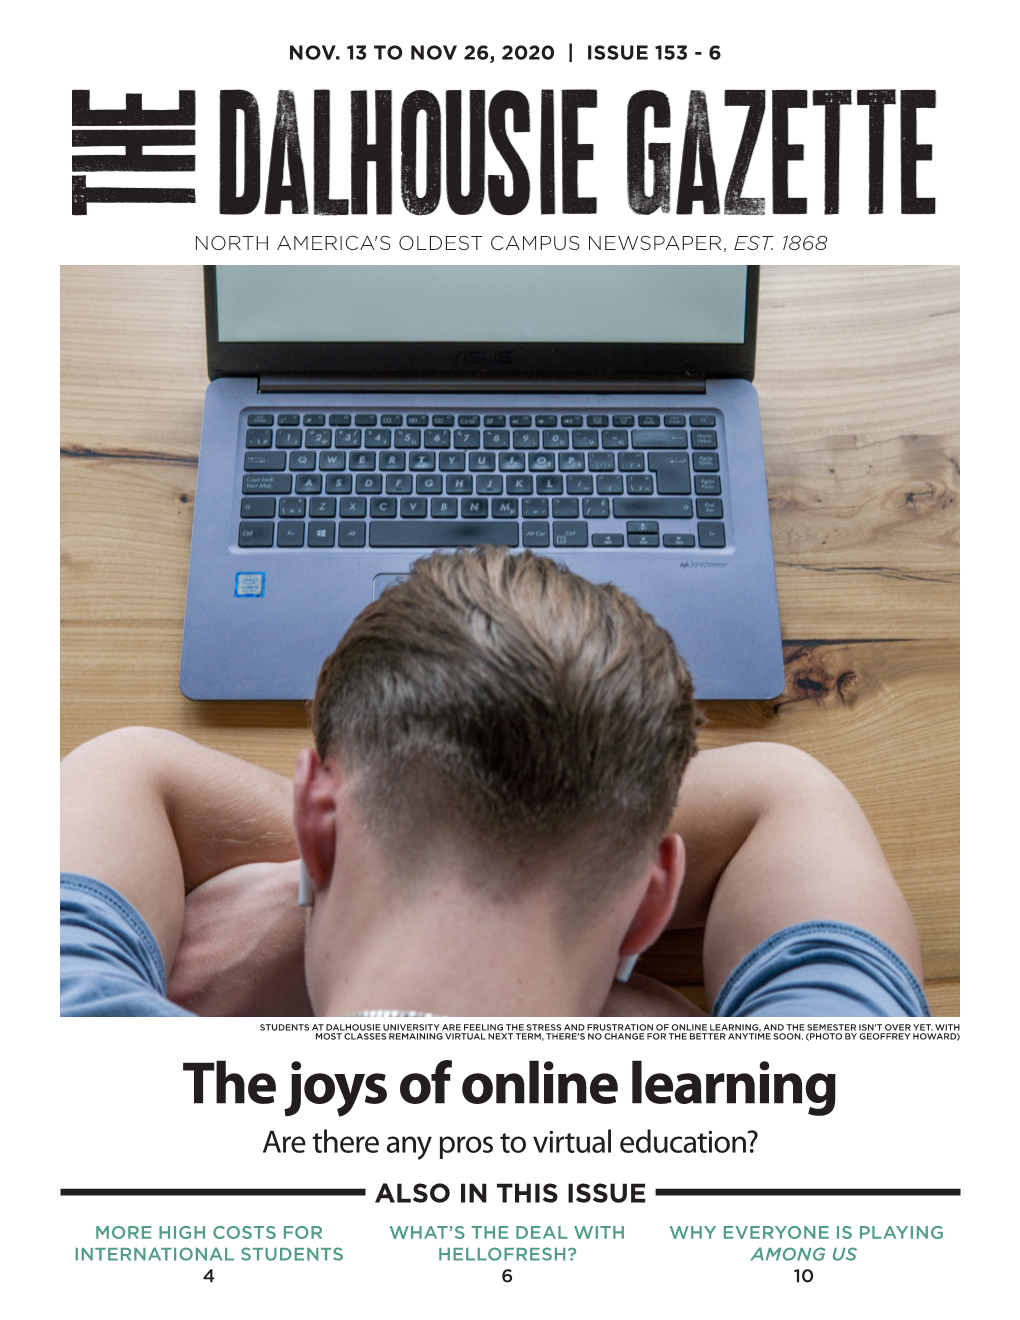 Issue 6. Vol 153: the Joys of Online Learning